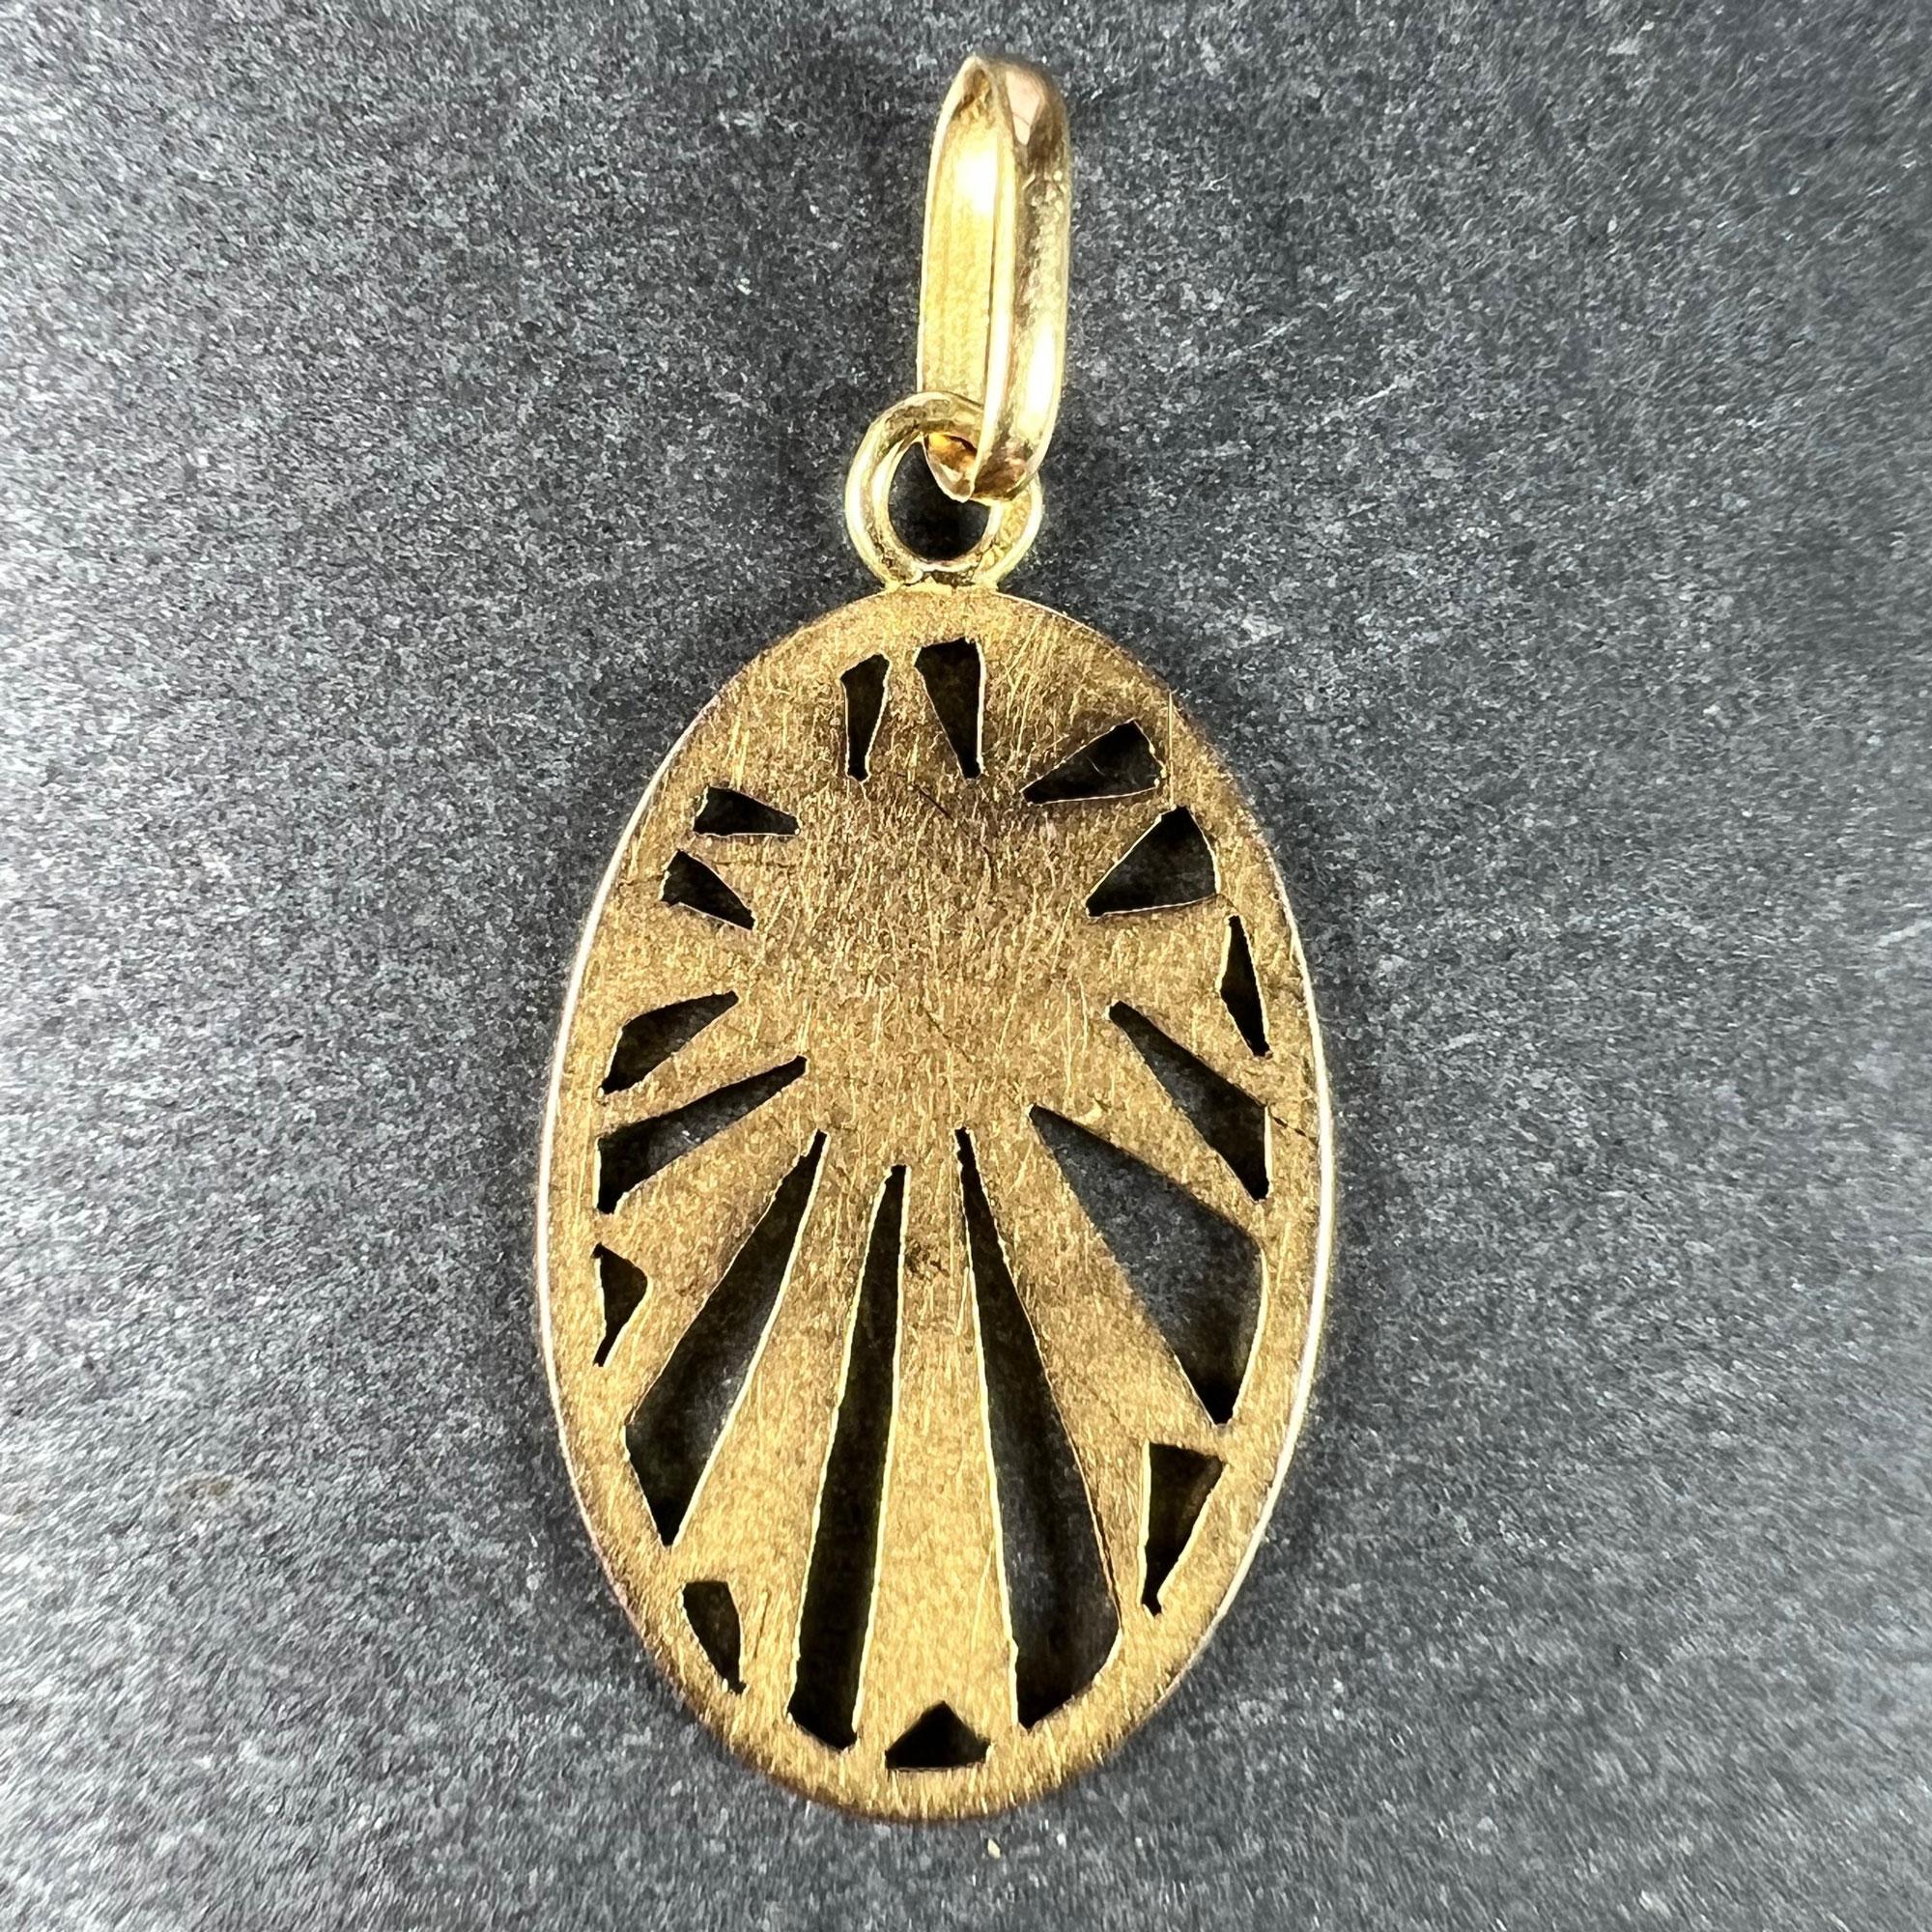 French Bonheur Lucky Star Good Luck 18K Yellow Gold Enamel Charm Pendant In Good Condition For Sale In London, GB